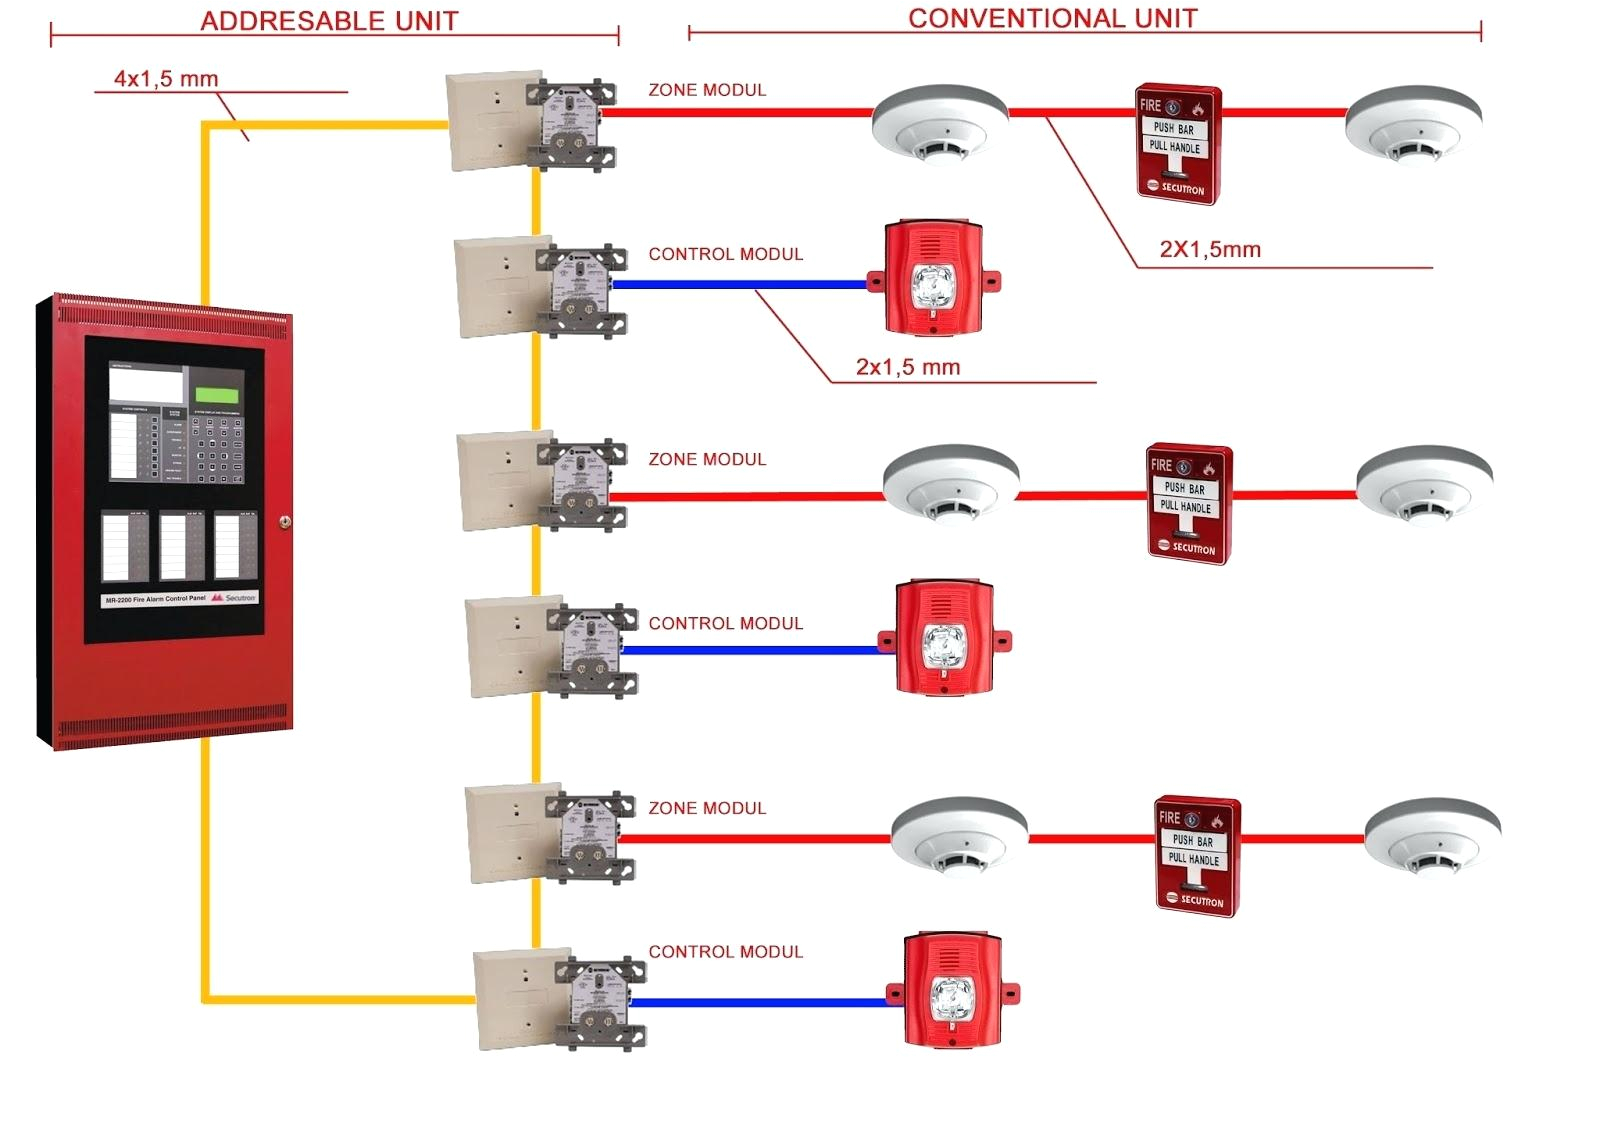 Fire Alarm Pull Station Wiring Diagram Ze 4278 Fire Alarm Panel Wiring Diagram On Networking